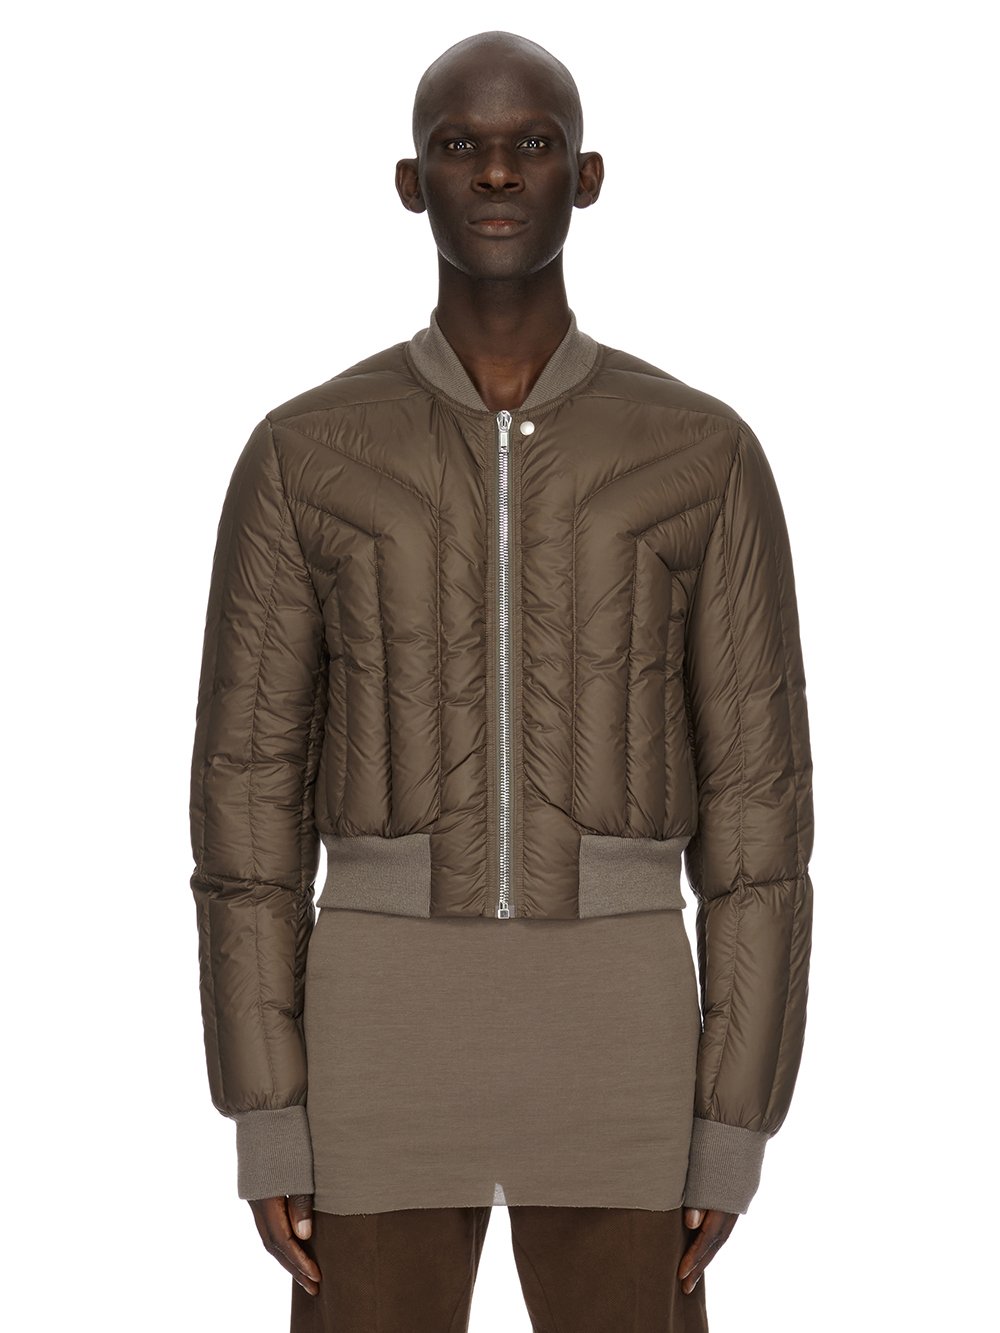 RICK OWENS FW23 LUXOR BOMBER LINER IN DUST GREY RECYCLED NYLON